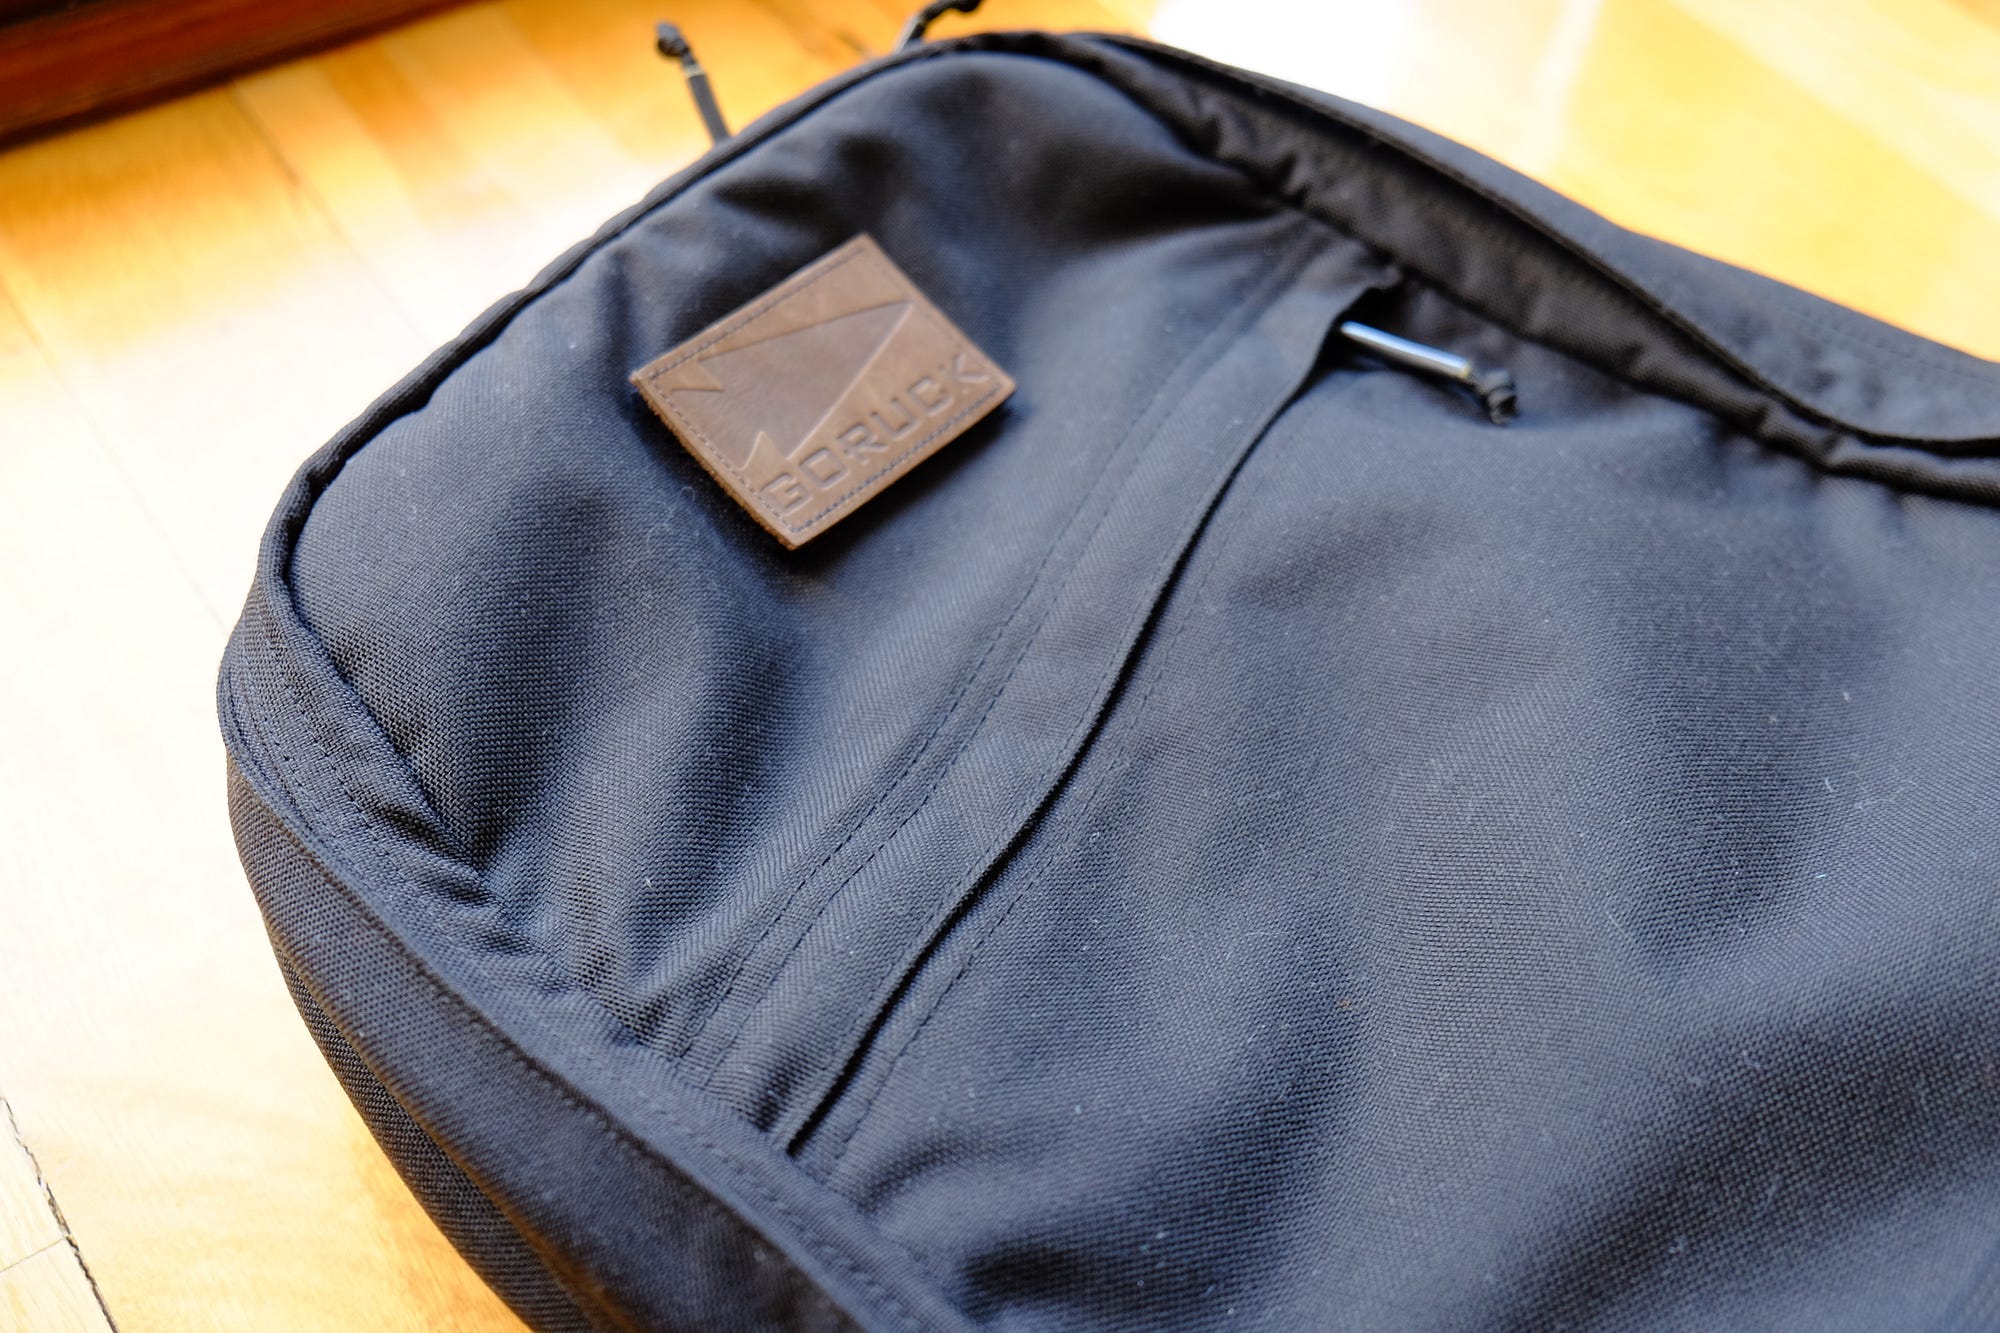 Goruck GR1 (26L) Backpack Review. I had many messenger bags in the past… |  by Fatih Arslan | Medium